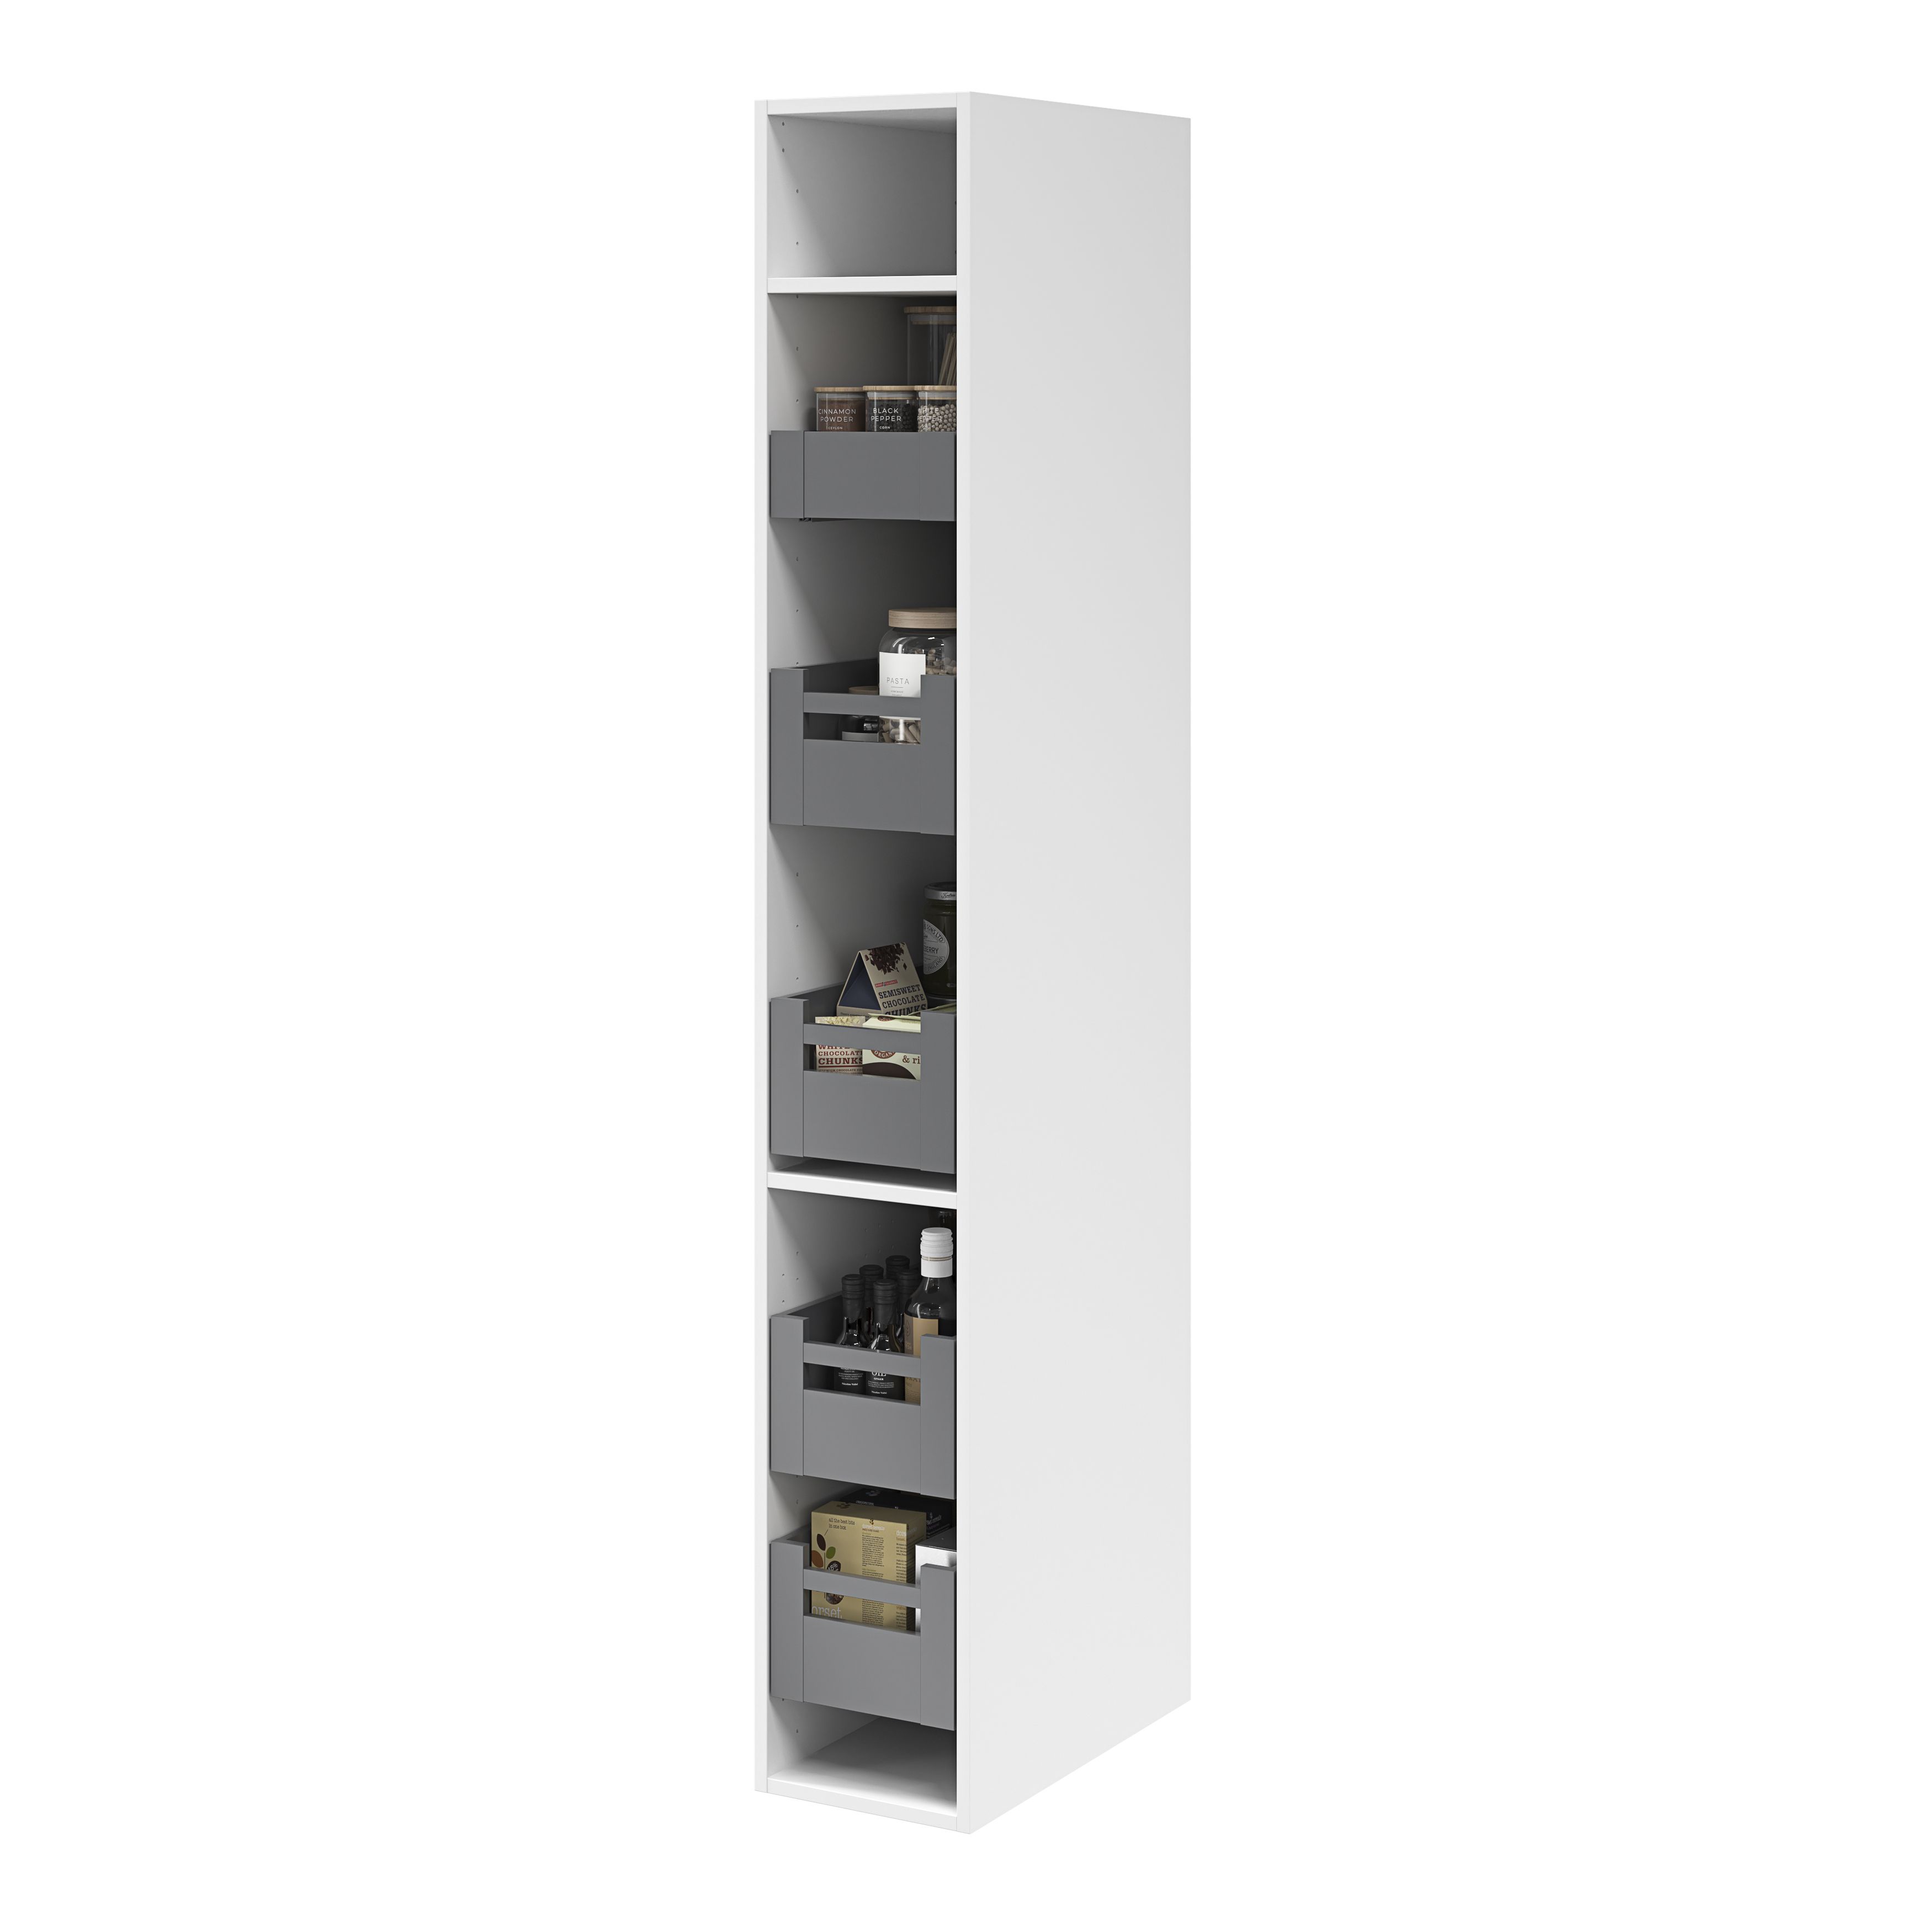 GoodHome Internal drawer front (W)300mm